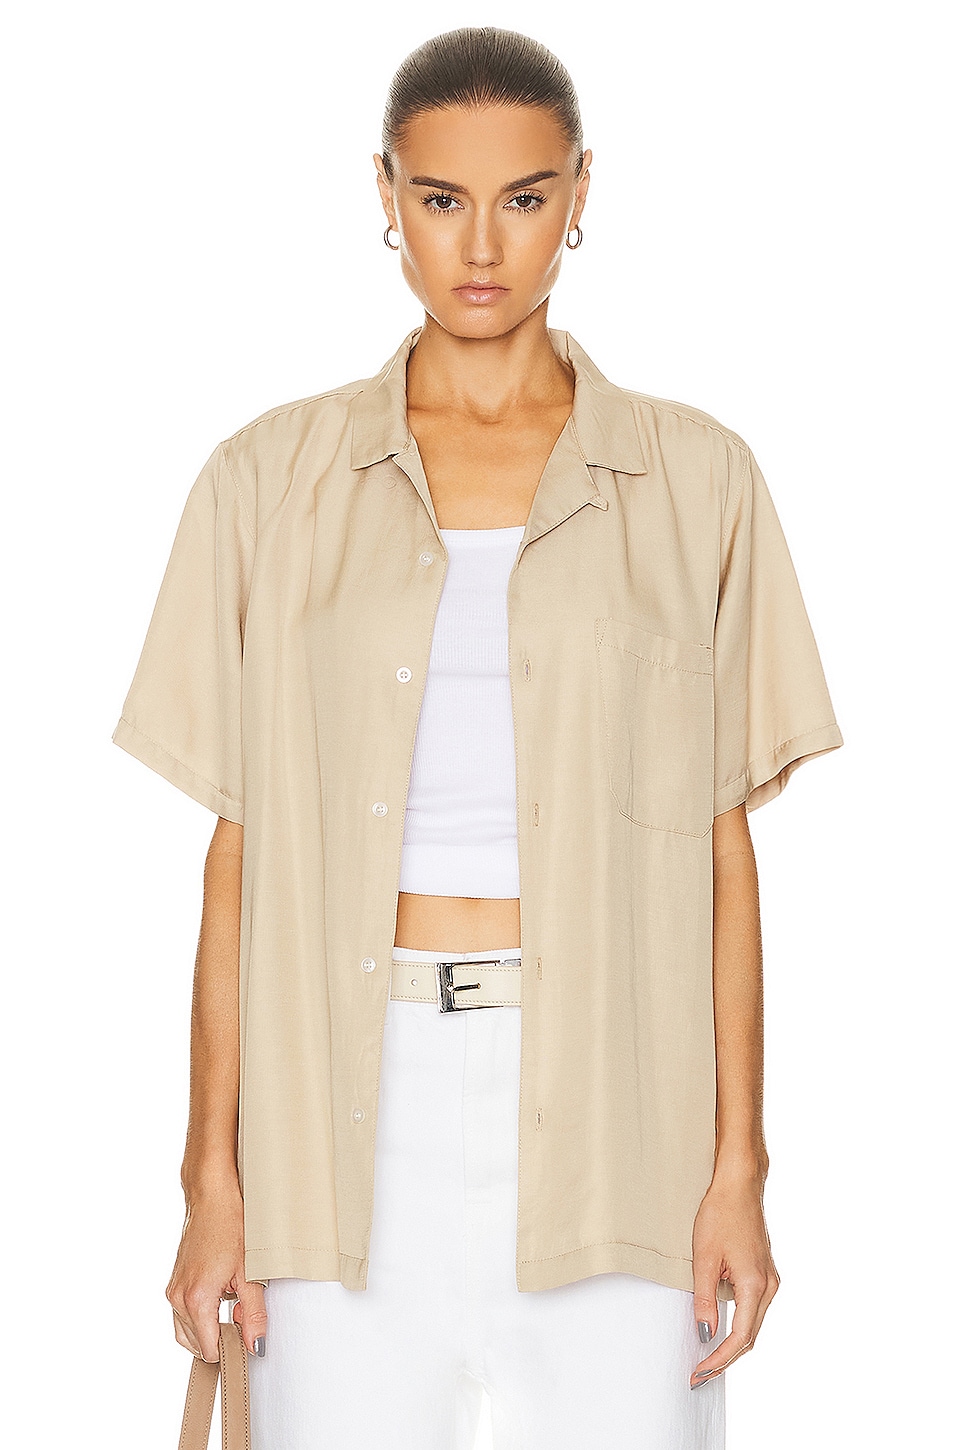 Image 1 of WAO The Camp Shirt in Tan